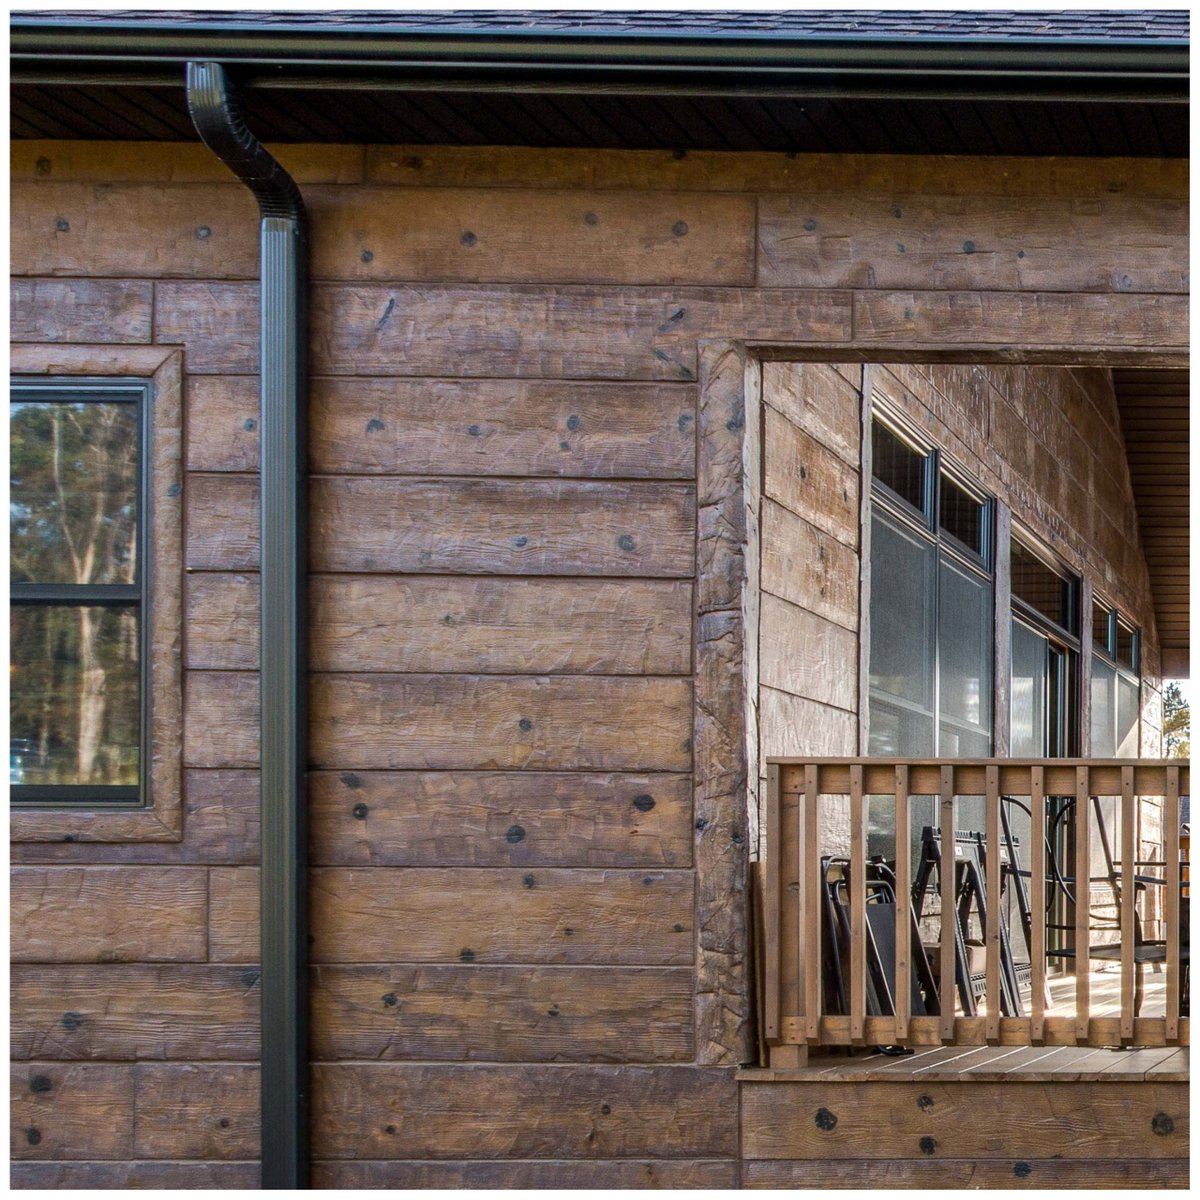 Our siding can be installed without the need for industrial support on not only new homes, but also remodels.
#ConcreteLogSiding #LogHome #ConcreteSiding #LogSiding #DreamHome #HouseGoals #NextGenLogs #LogCabin #ConcreteConstruction #MaintenanceFree #loghomeliving #logcabinliving